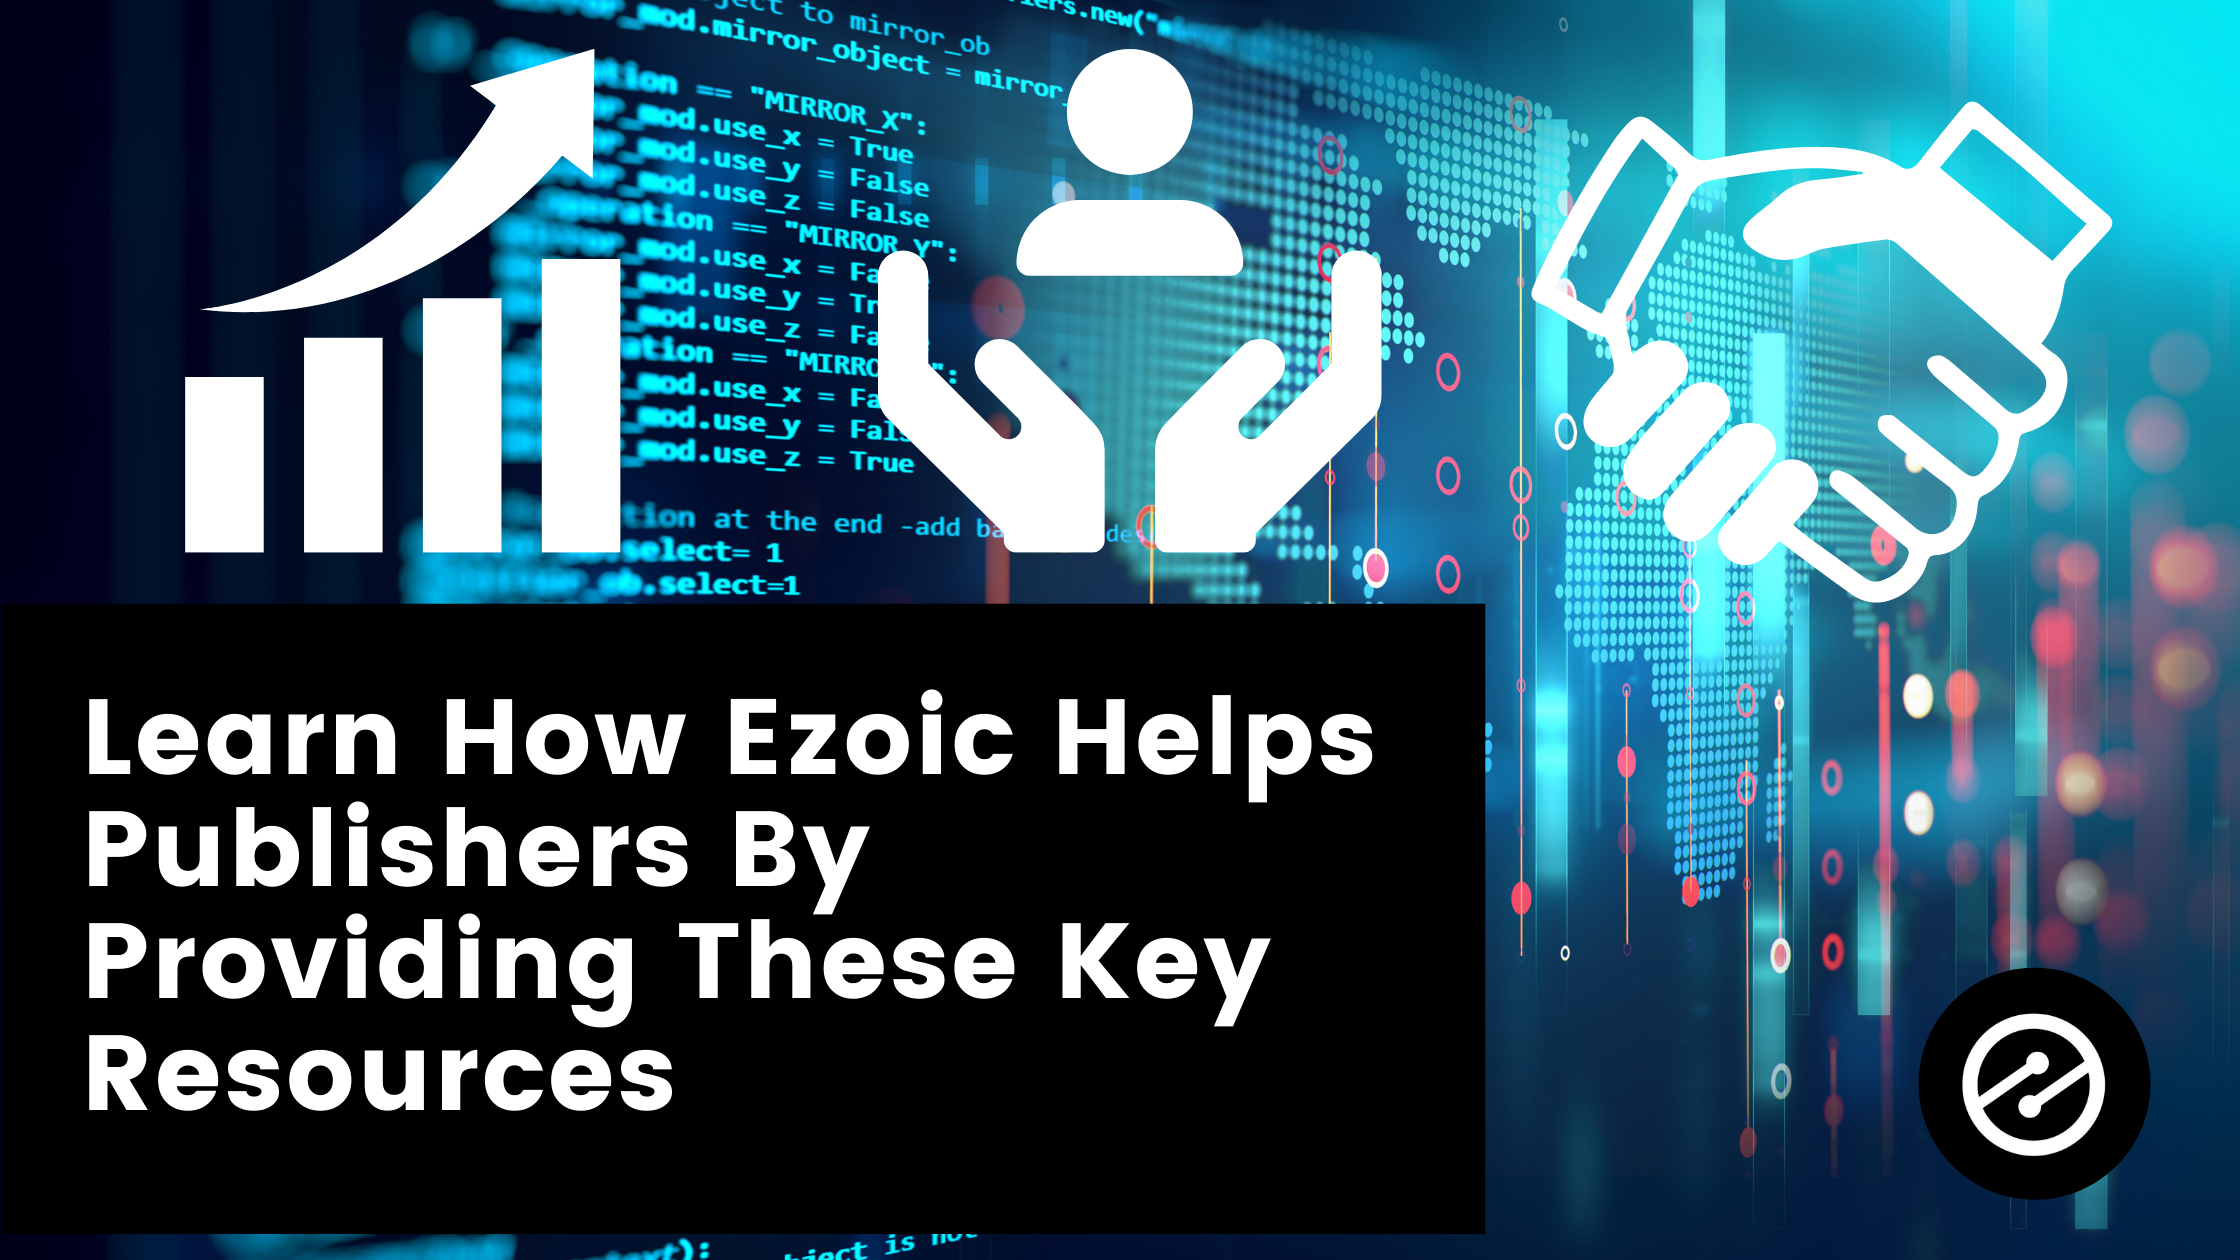 Learn How Ezoic Helps Publishers By Providing These Key Resources